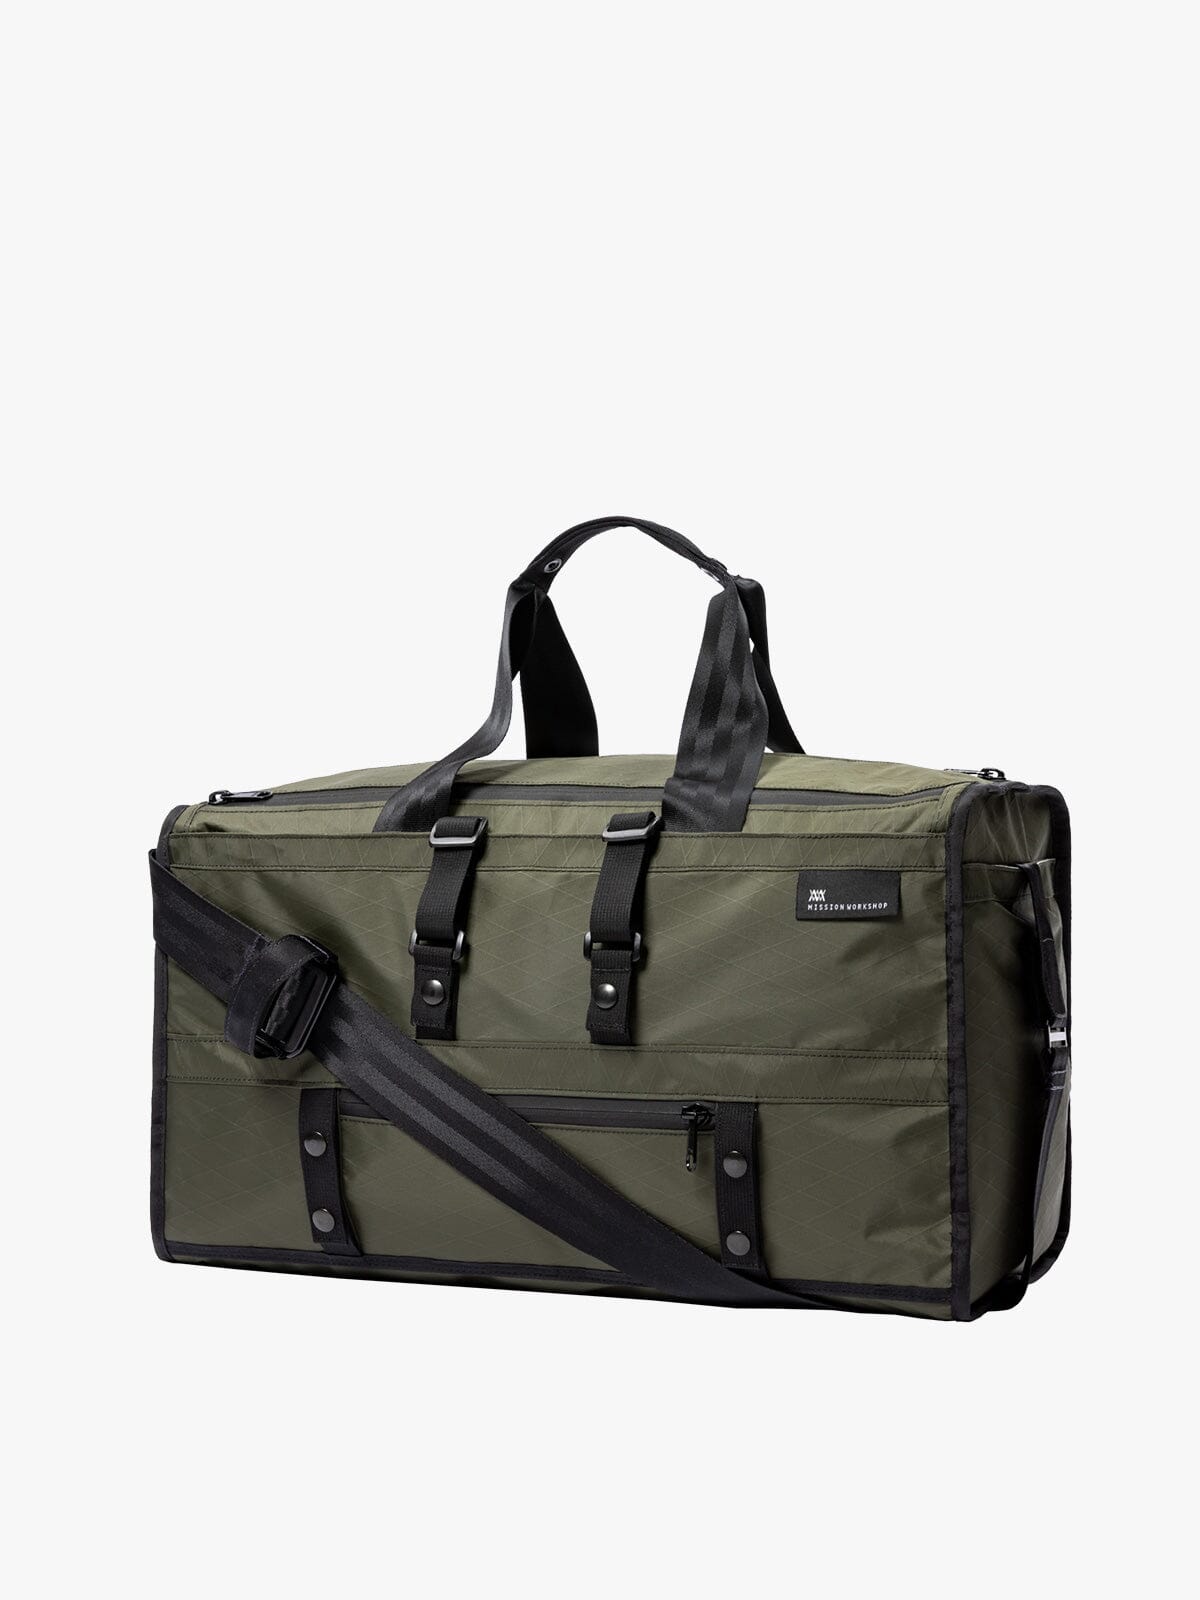 Mass Transit : Duffle by Mission Workshop - Weatherproof Bags & Technical Apparel - San Francisco & Los Angeles - Built to endure - Guaranteed forever